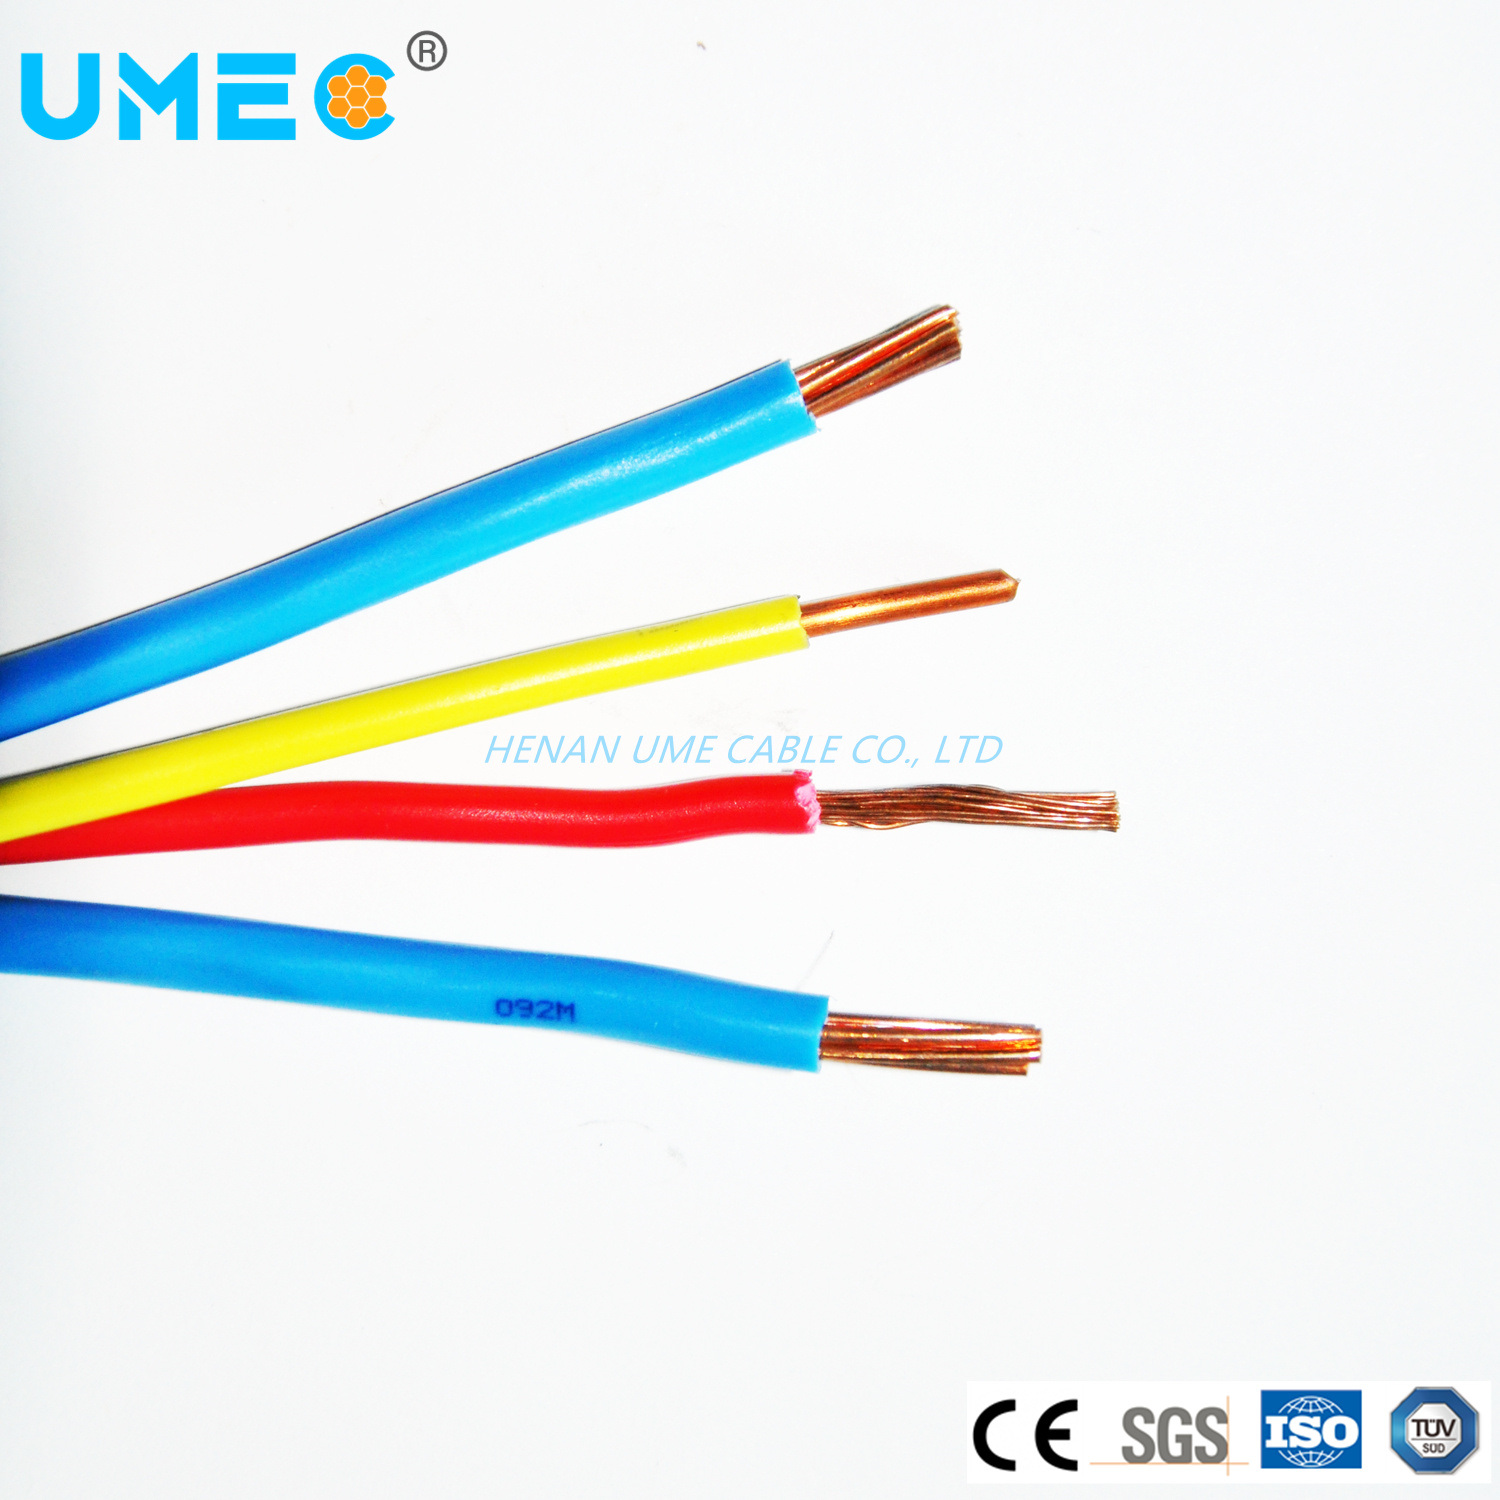 Heat-Resistant Nylon Coating Wire Tw Thw Thw-2 #AWG8 #AWG10 #AWG12 #AWG16 Cable Wire